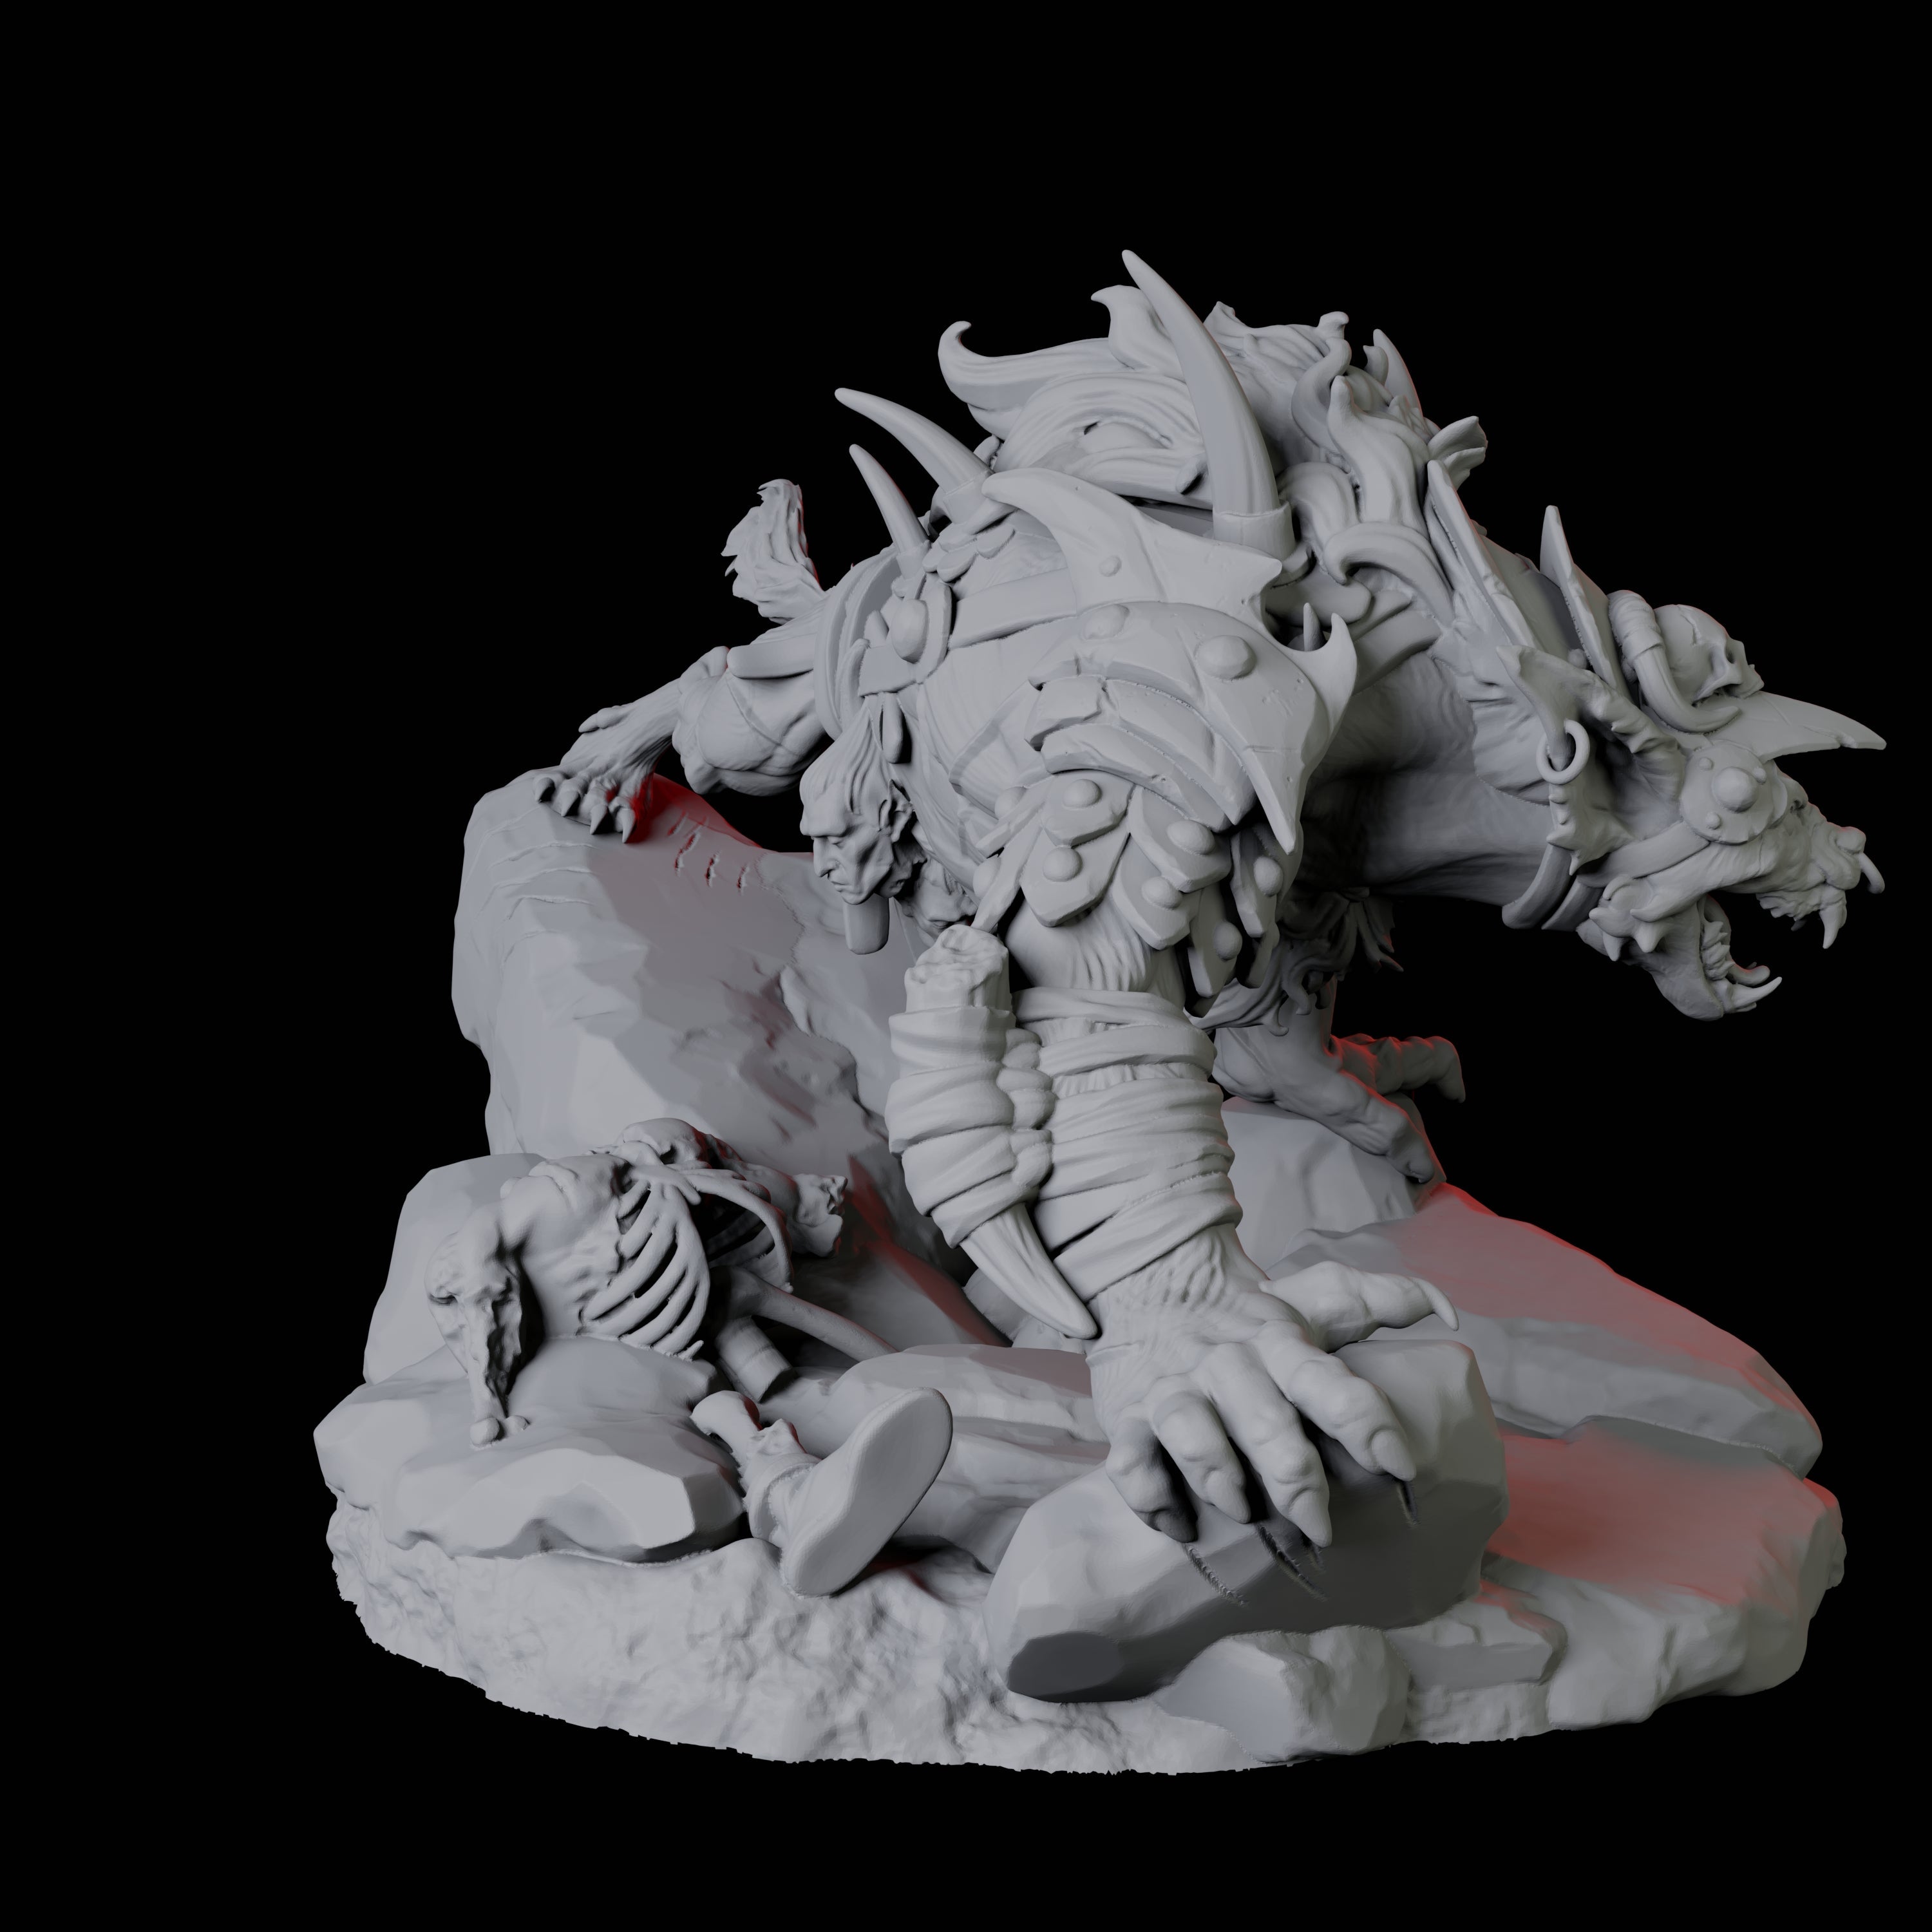 Gnoll Tracker C Miniature for Dungeons and Dragons, Pathfinder or other TTRPGs